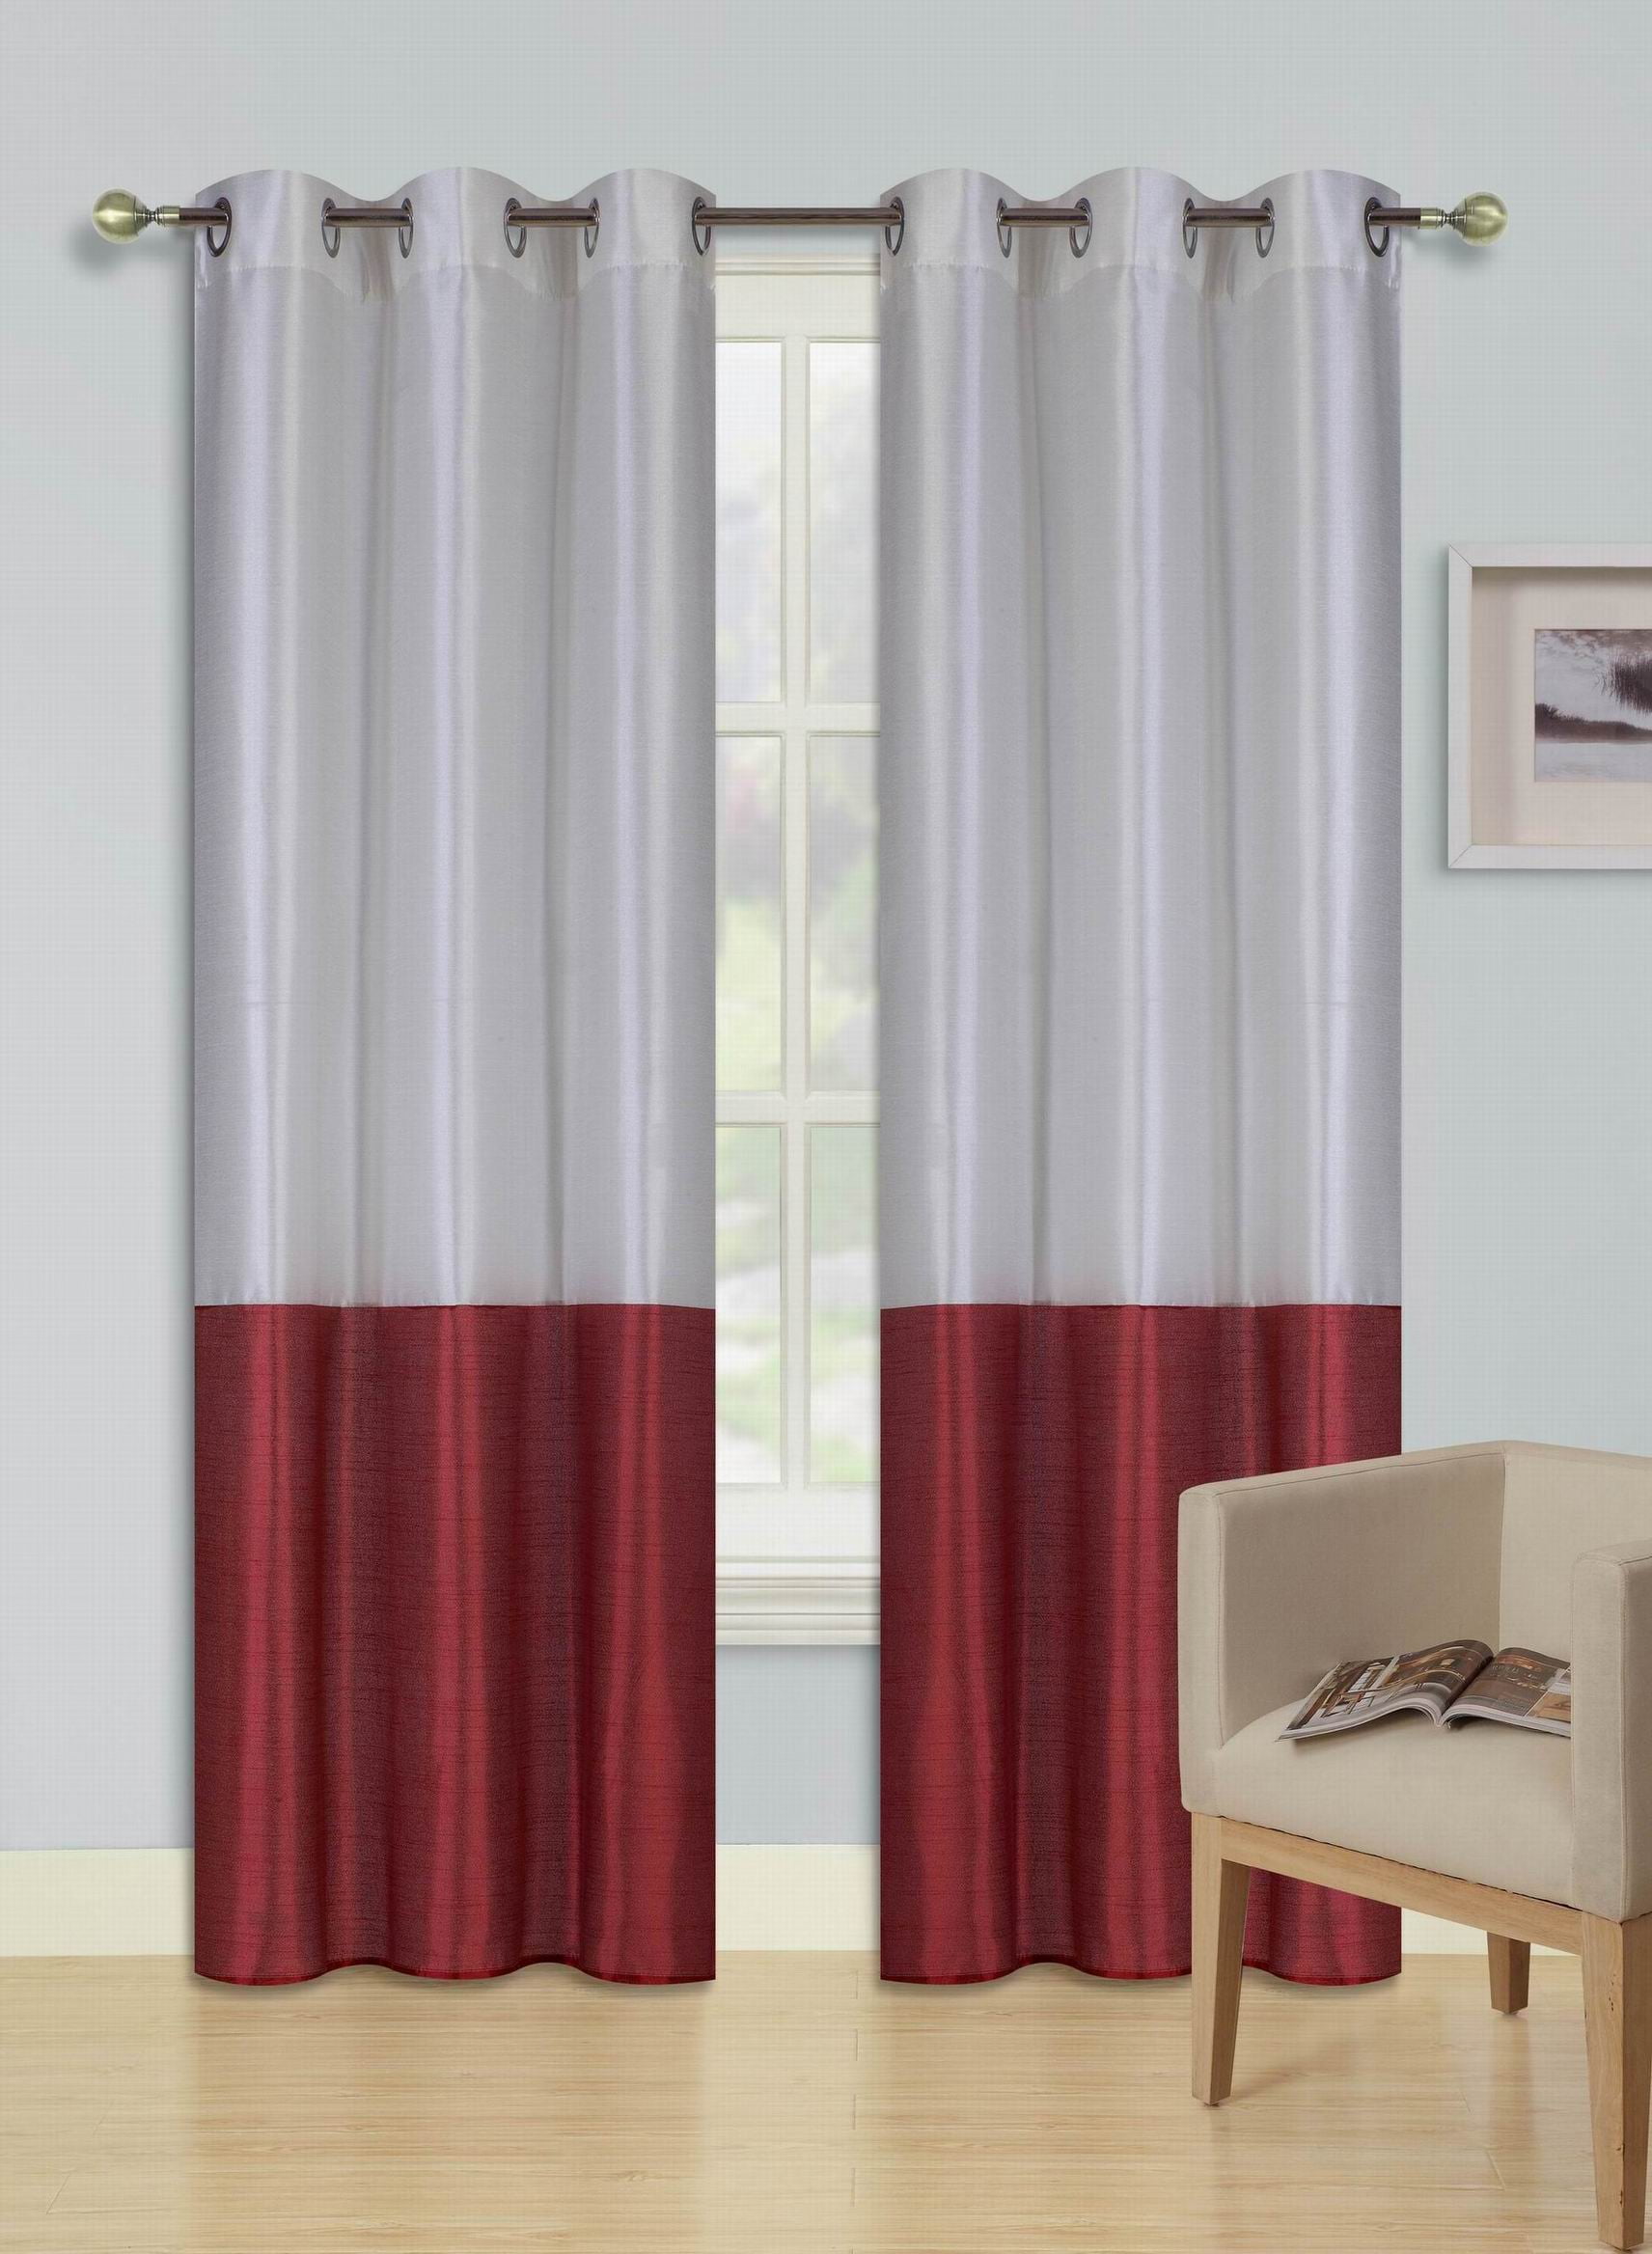 1PC New 2-TONE Window Curtain Grommet Panel Lined Blackout EID GOLD TAUPE 